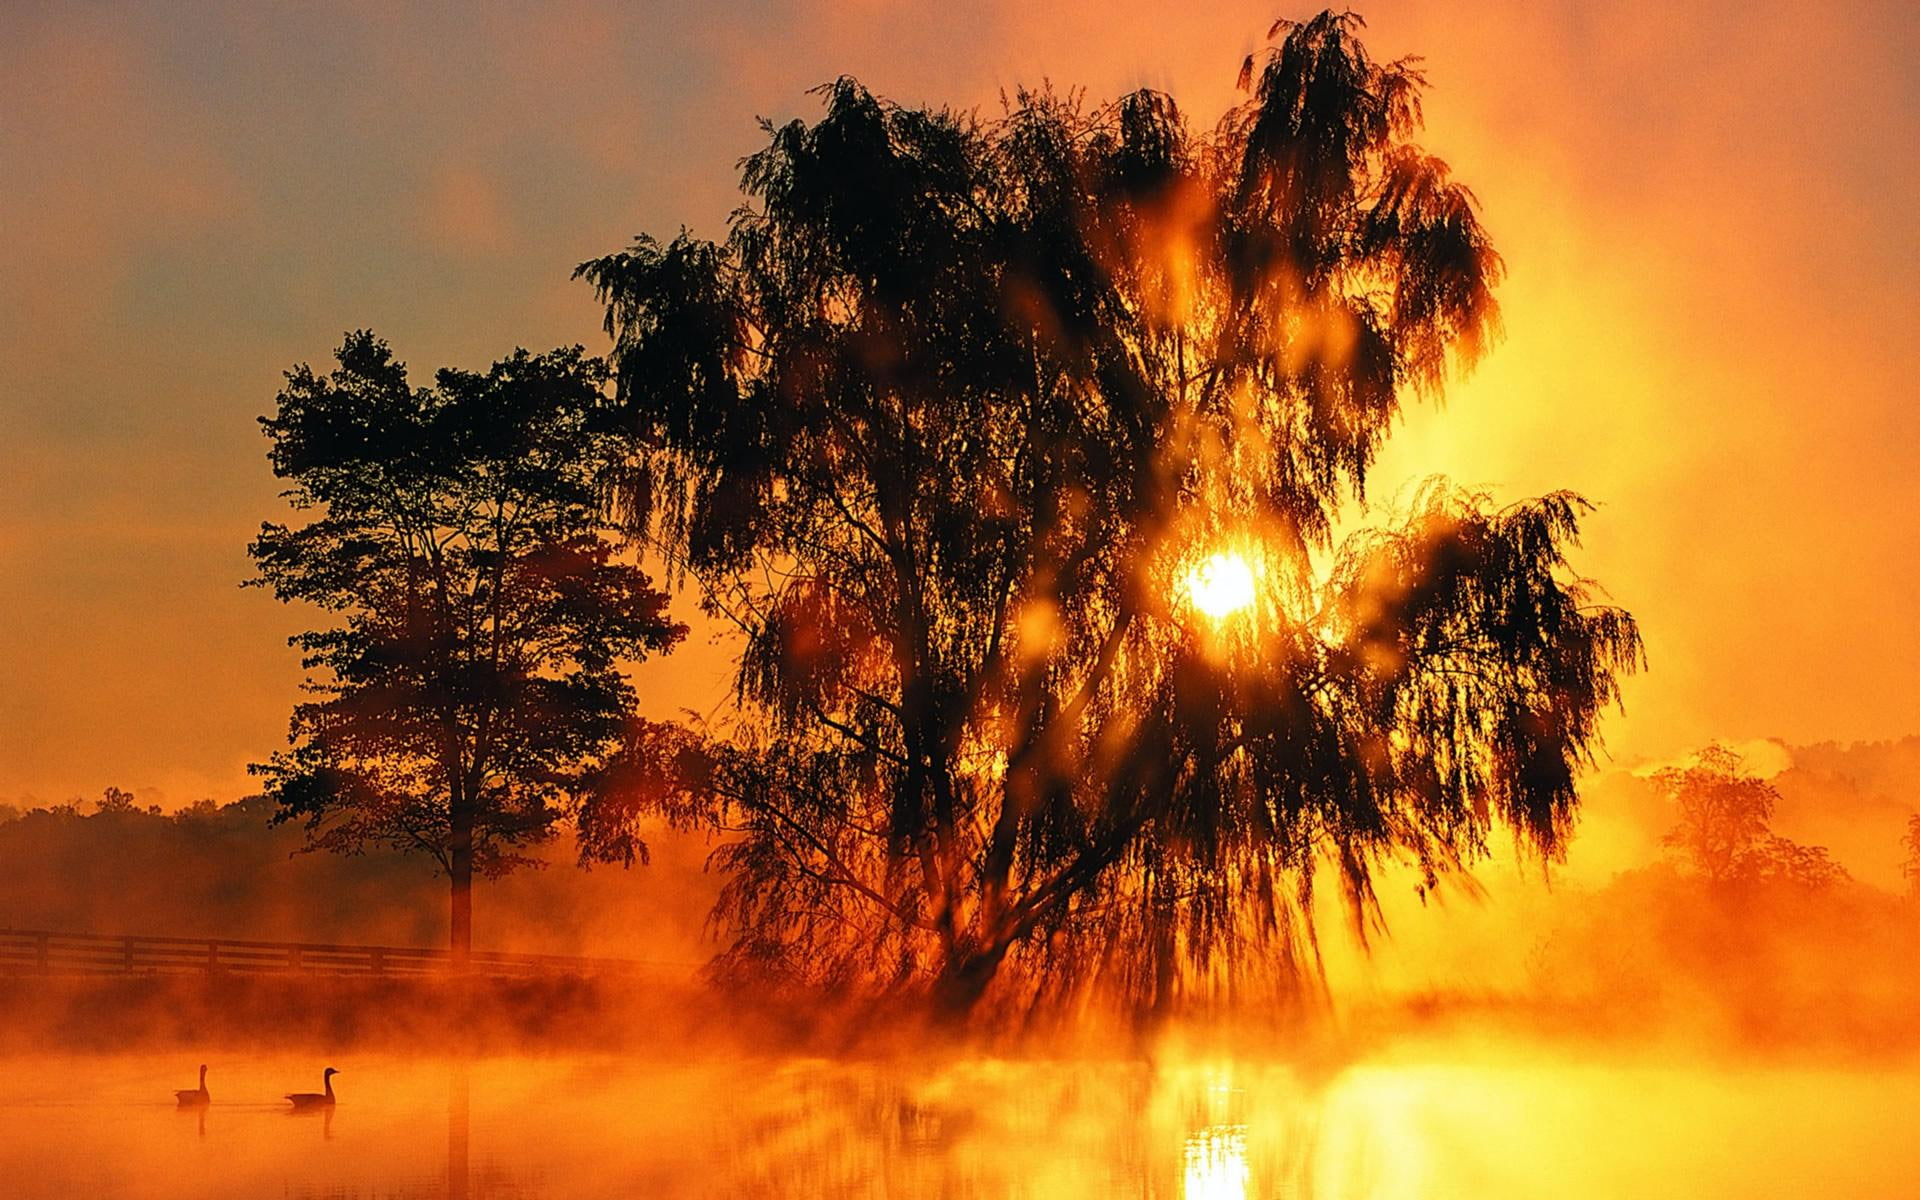 Sunset Desktop, nature, tree, 3d and abstract